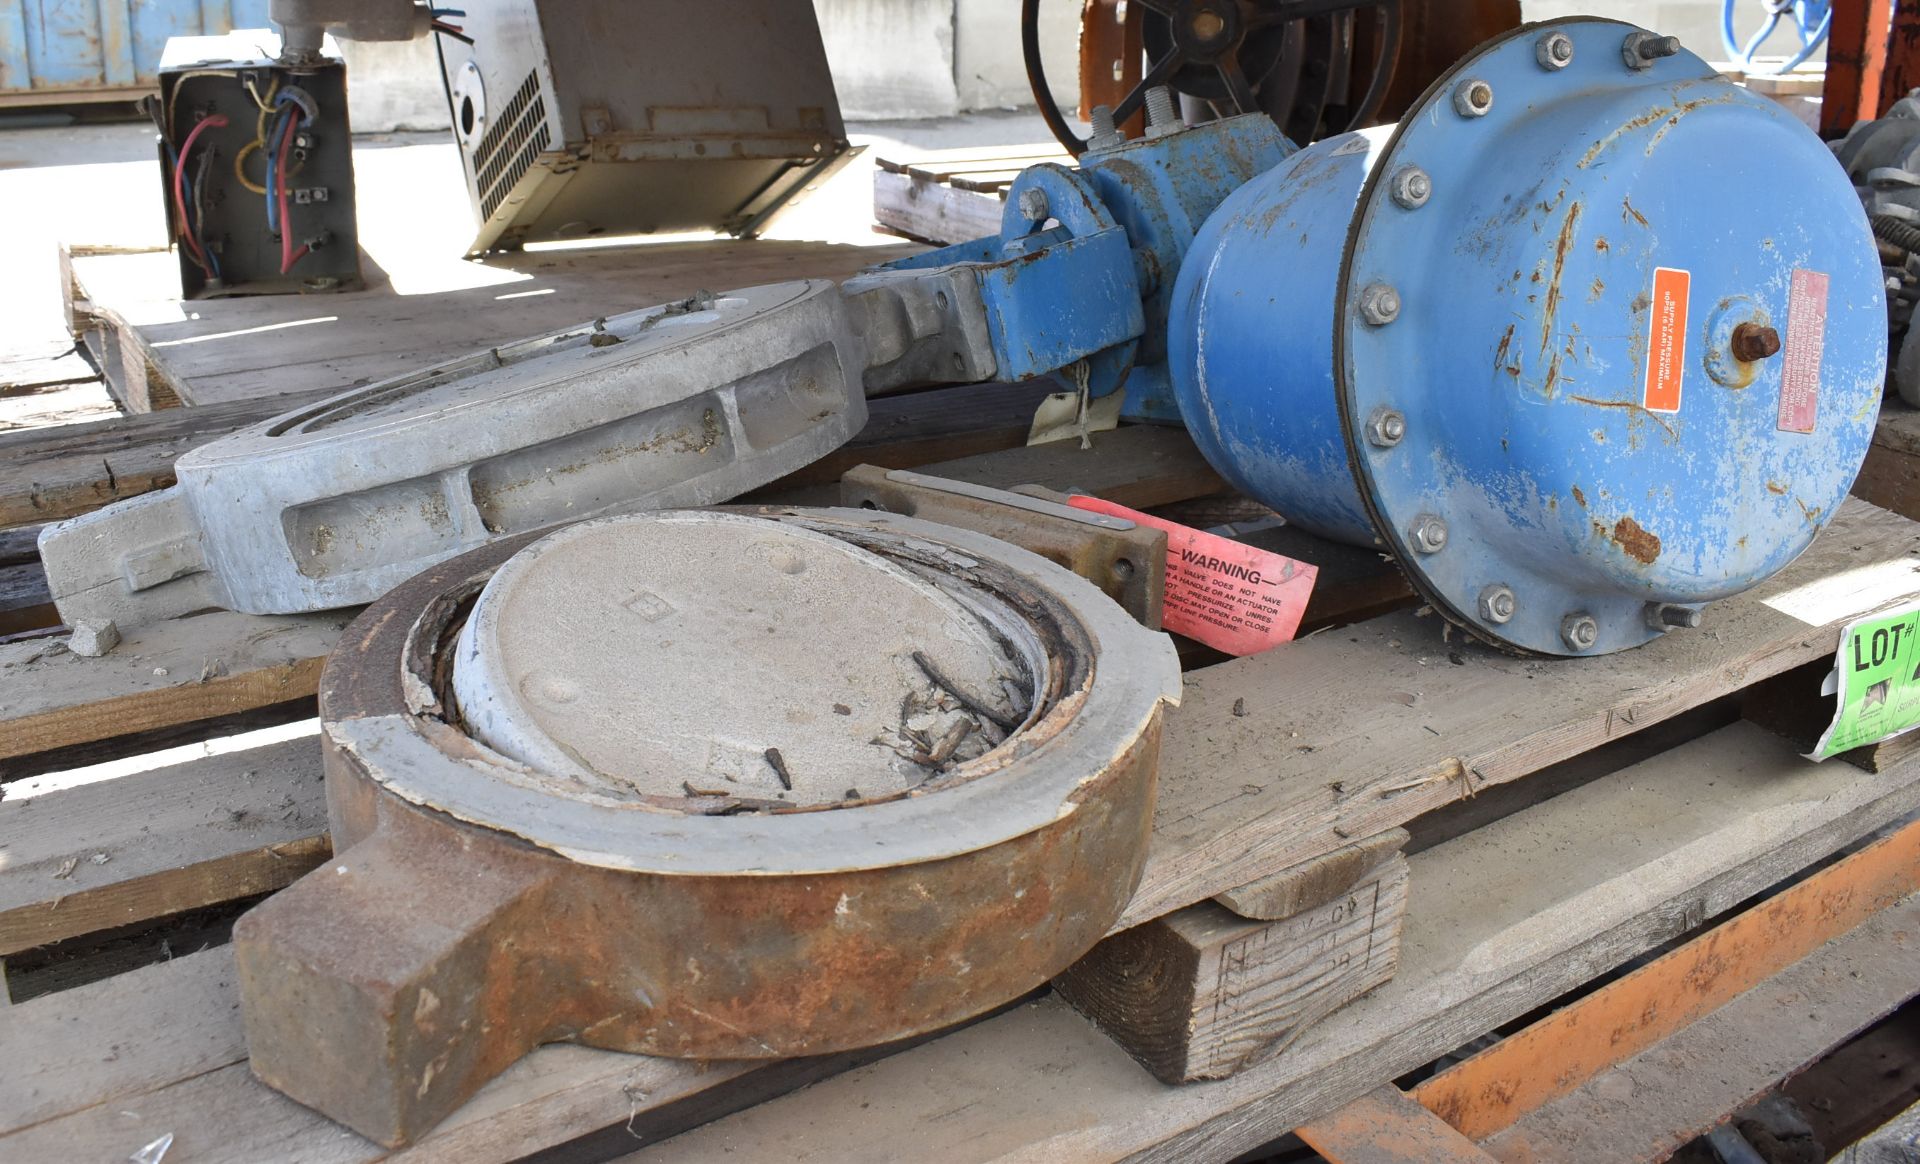 LOT/ CONTENTS OF SHELF - SKID WITH MFG. UNKNOWN 3" KNIFE VALVES, SKID WITH ACTUATED BUTTERFLY - Image 2 of 4